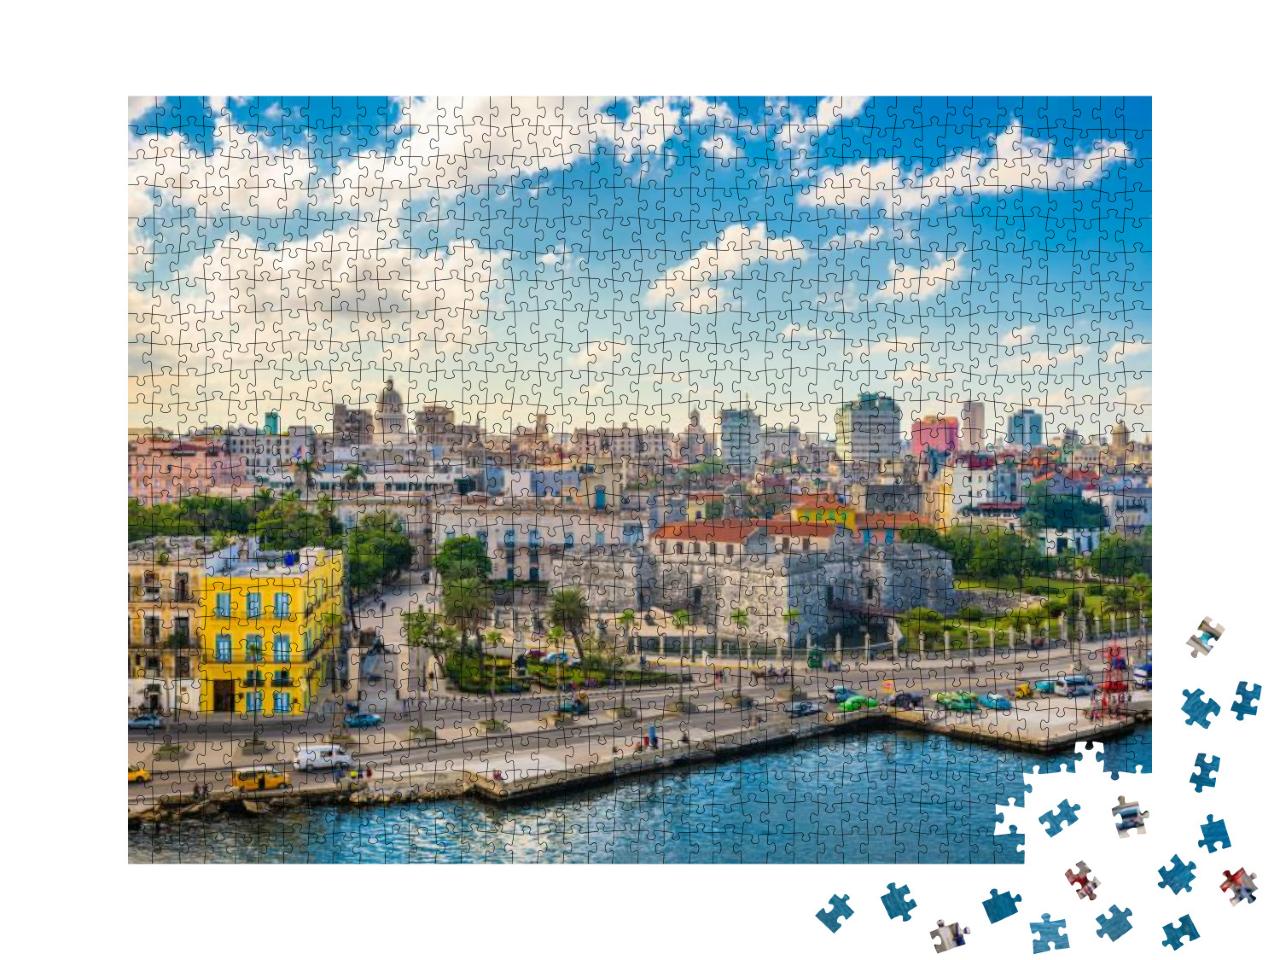 Havana, Cuba Downtown Skyline on the Malecon... Jigsaw Puzzle with 1000 pieces